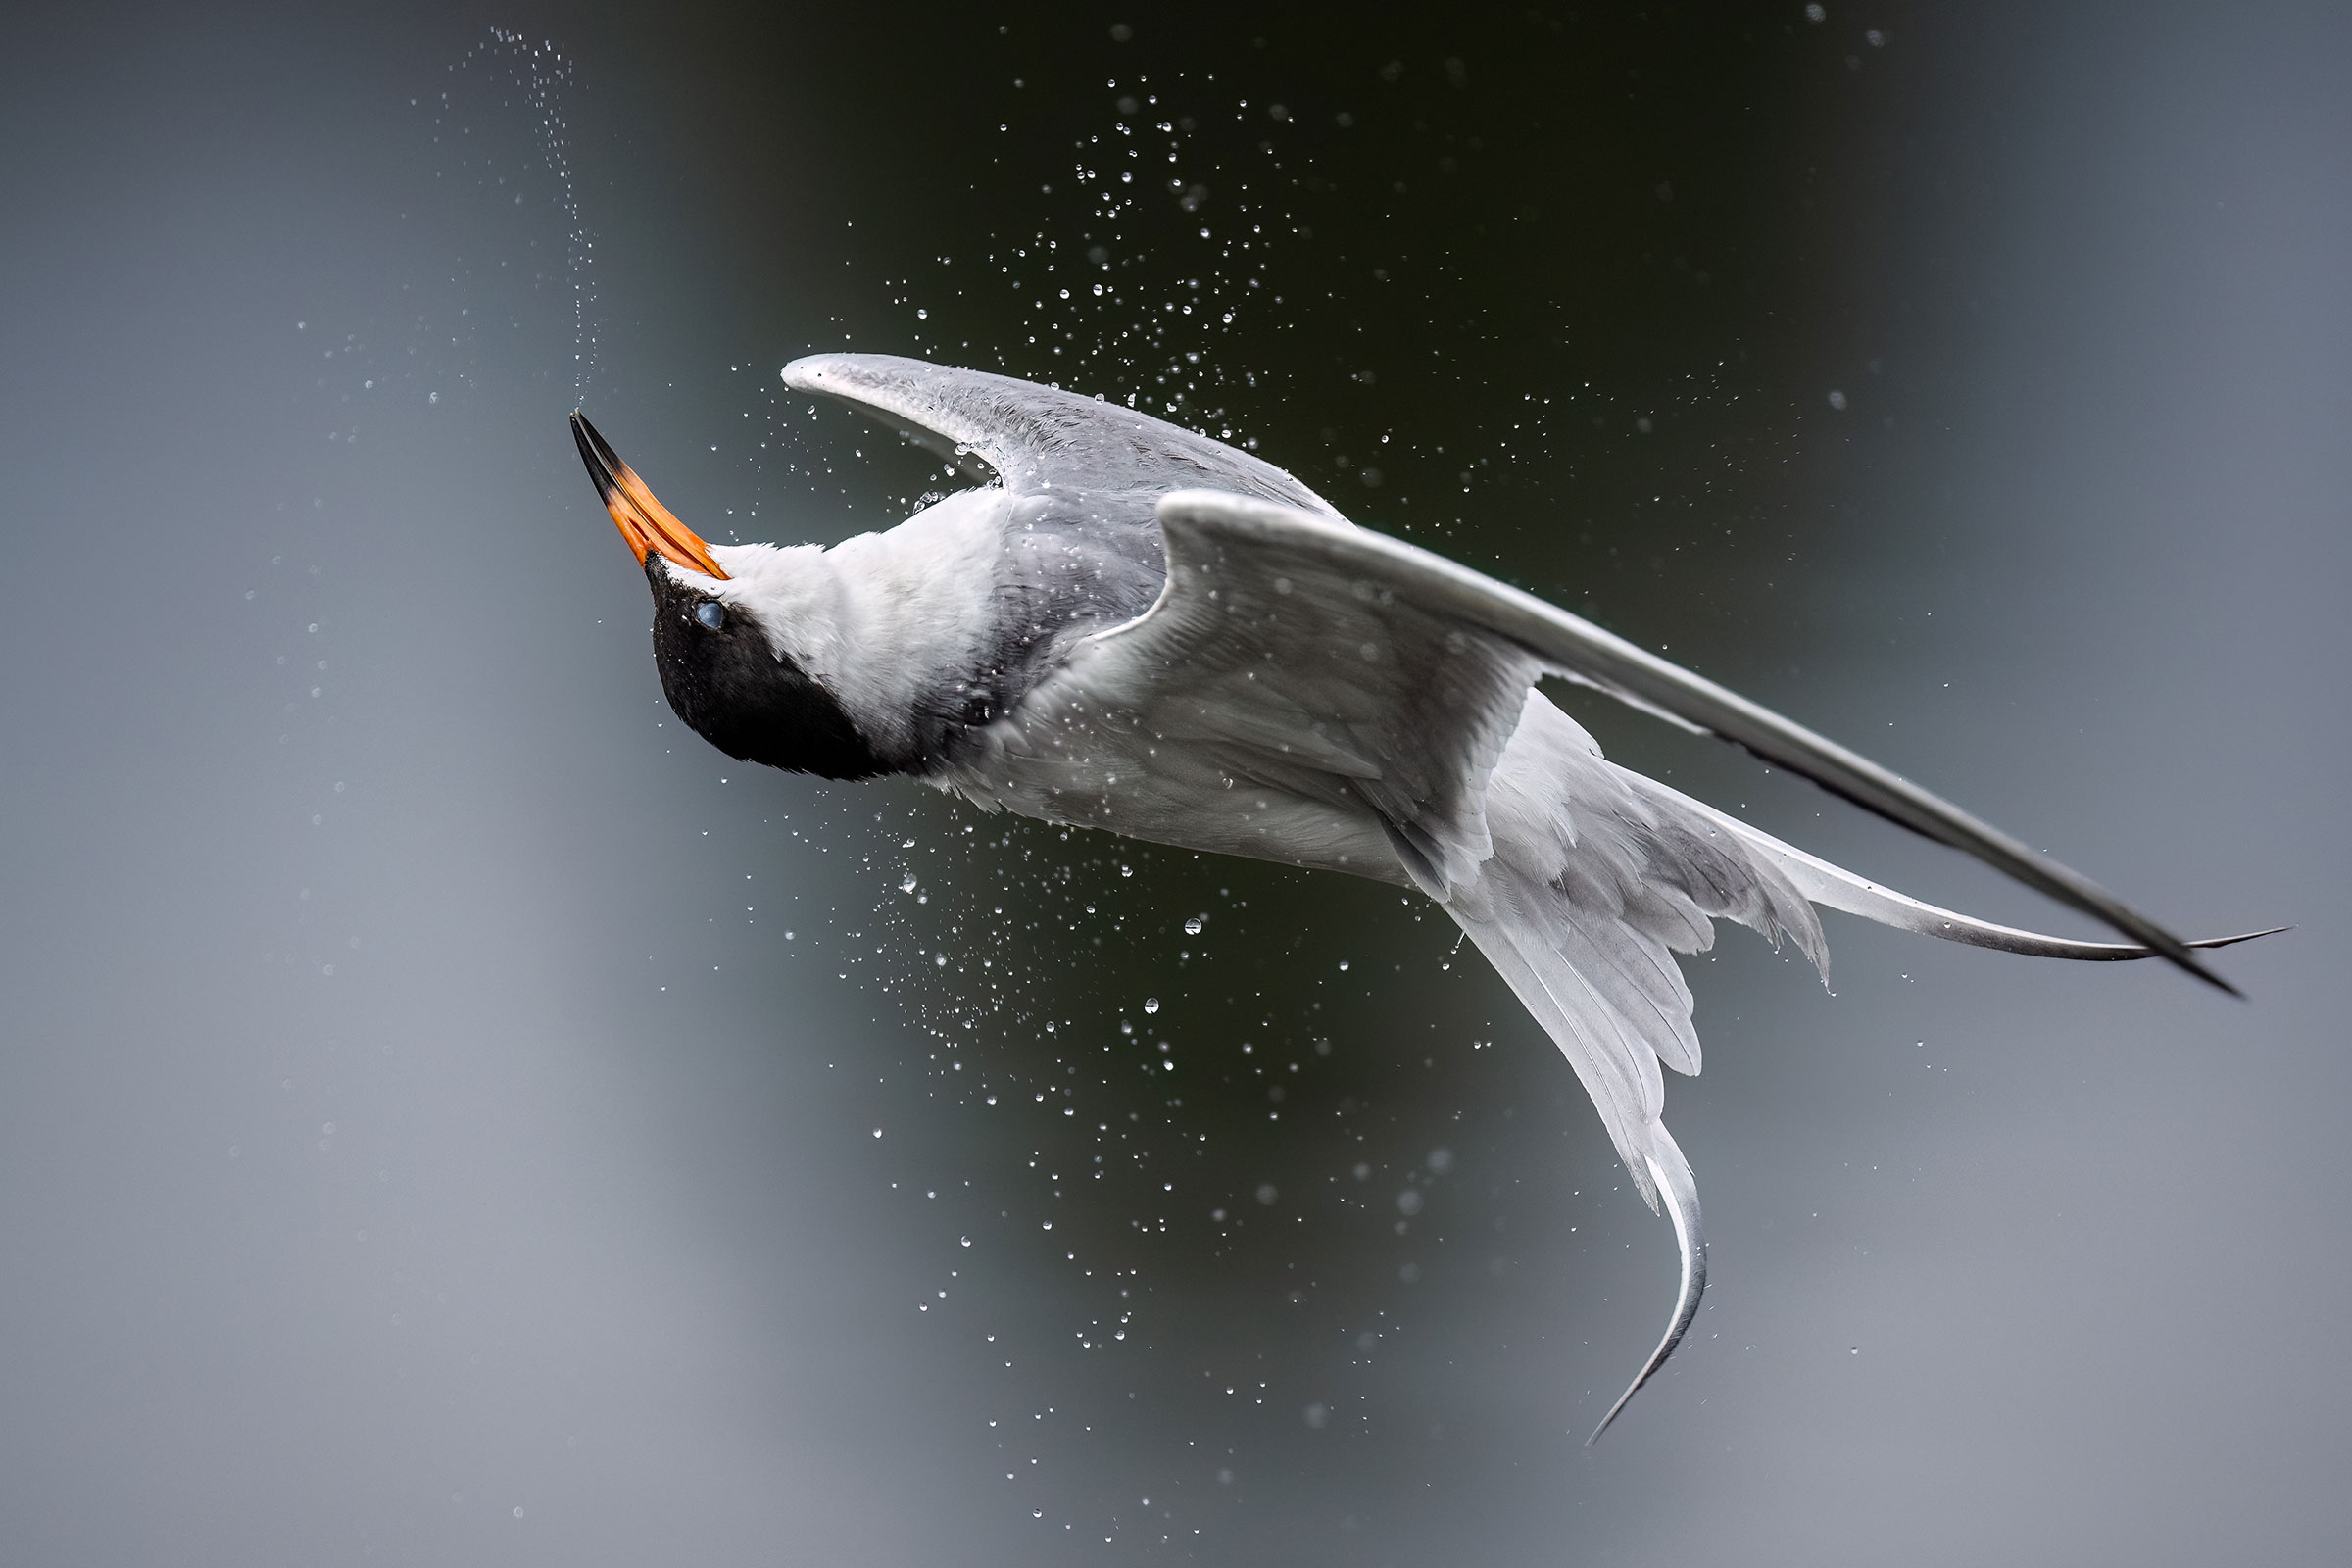 A Forster’s Tern is in the air, its head turned almost 180 degrees so that its bill is pointing almost straight up, and its tail is twisted. The bird’s outstretched wings give the impression the bird is floating upside down. Water droplets appear in a stream from the bird’s bill and also below it.